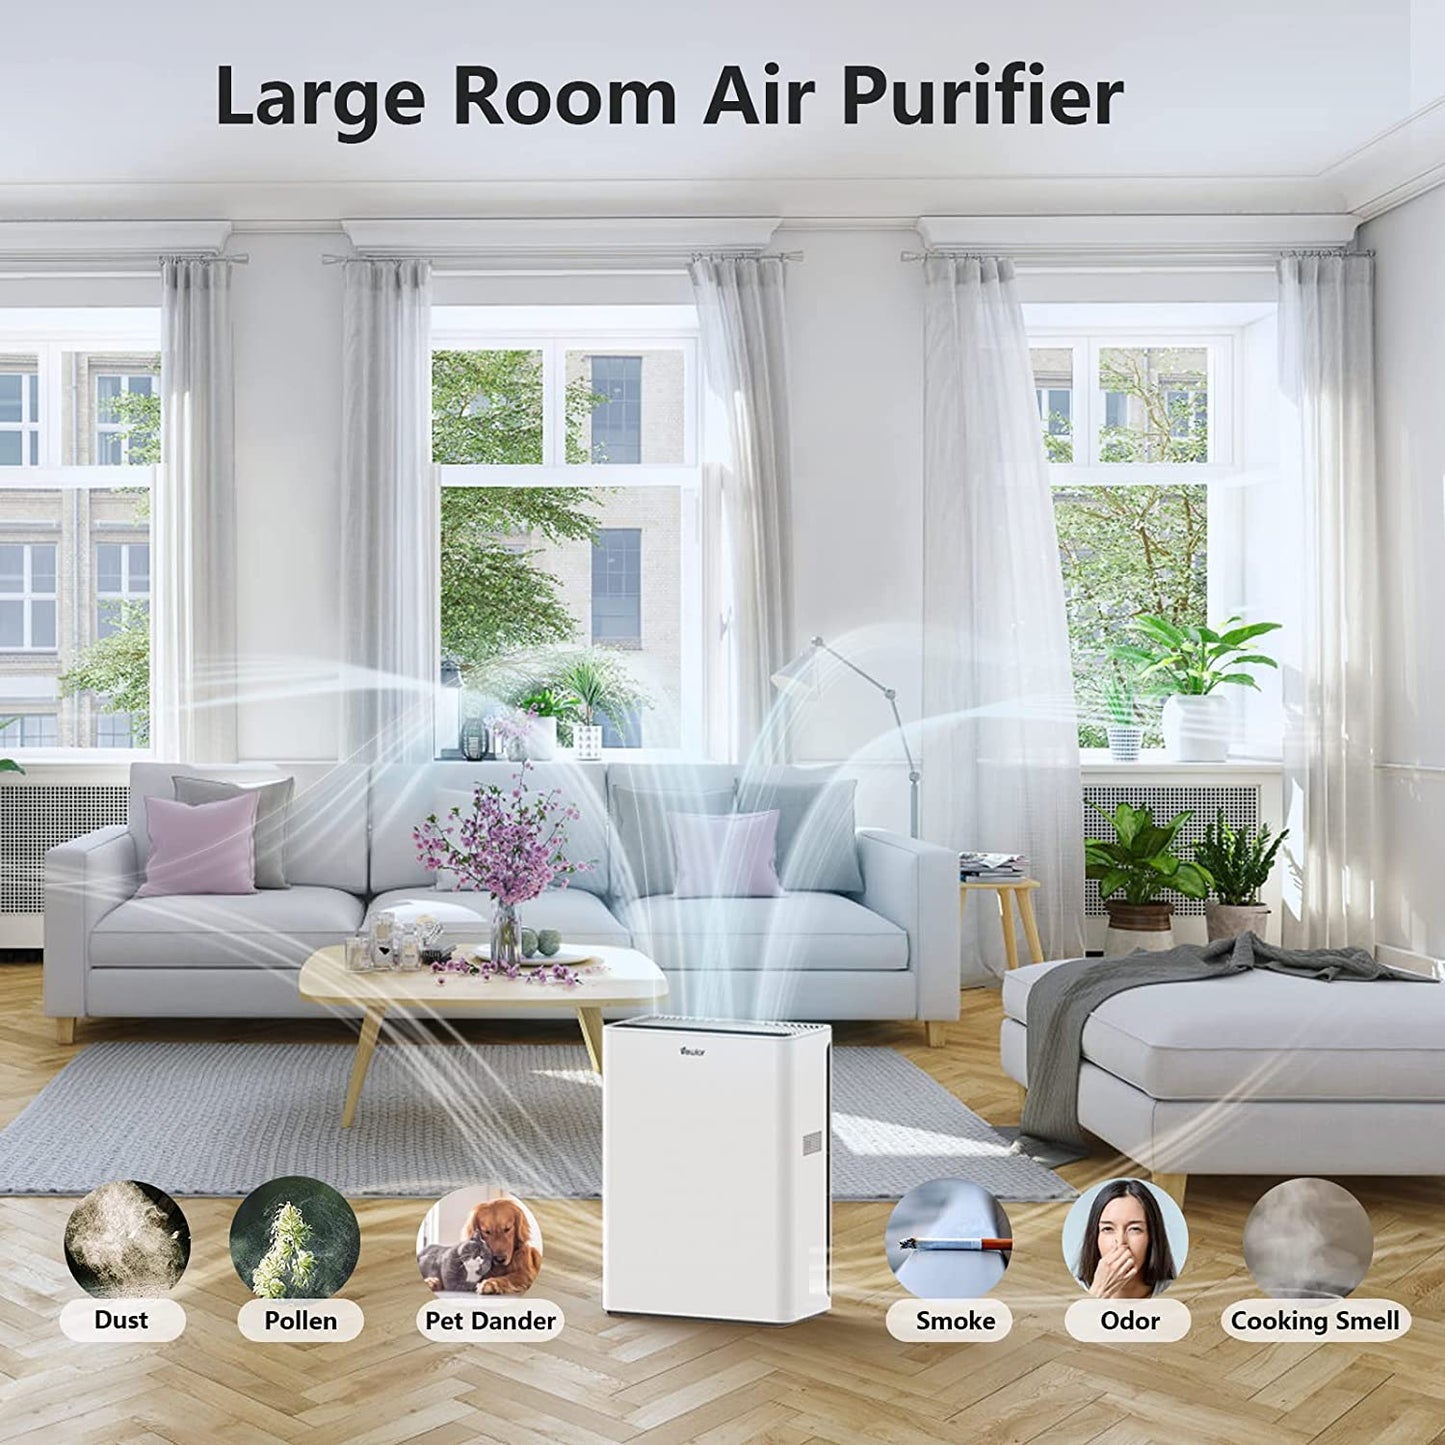 Vewior Home Air Purifier for Large Room True HEPA Air Filter Cleaner with Sleep Mode 5 Timer 3 Speed Adjustable Vewior